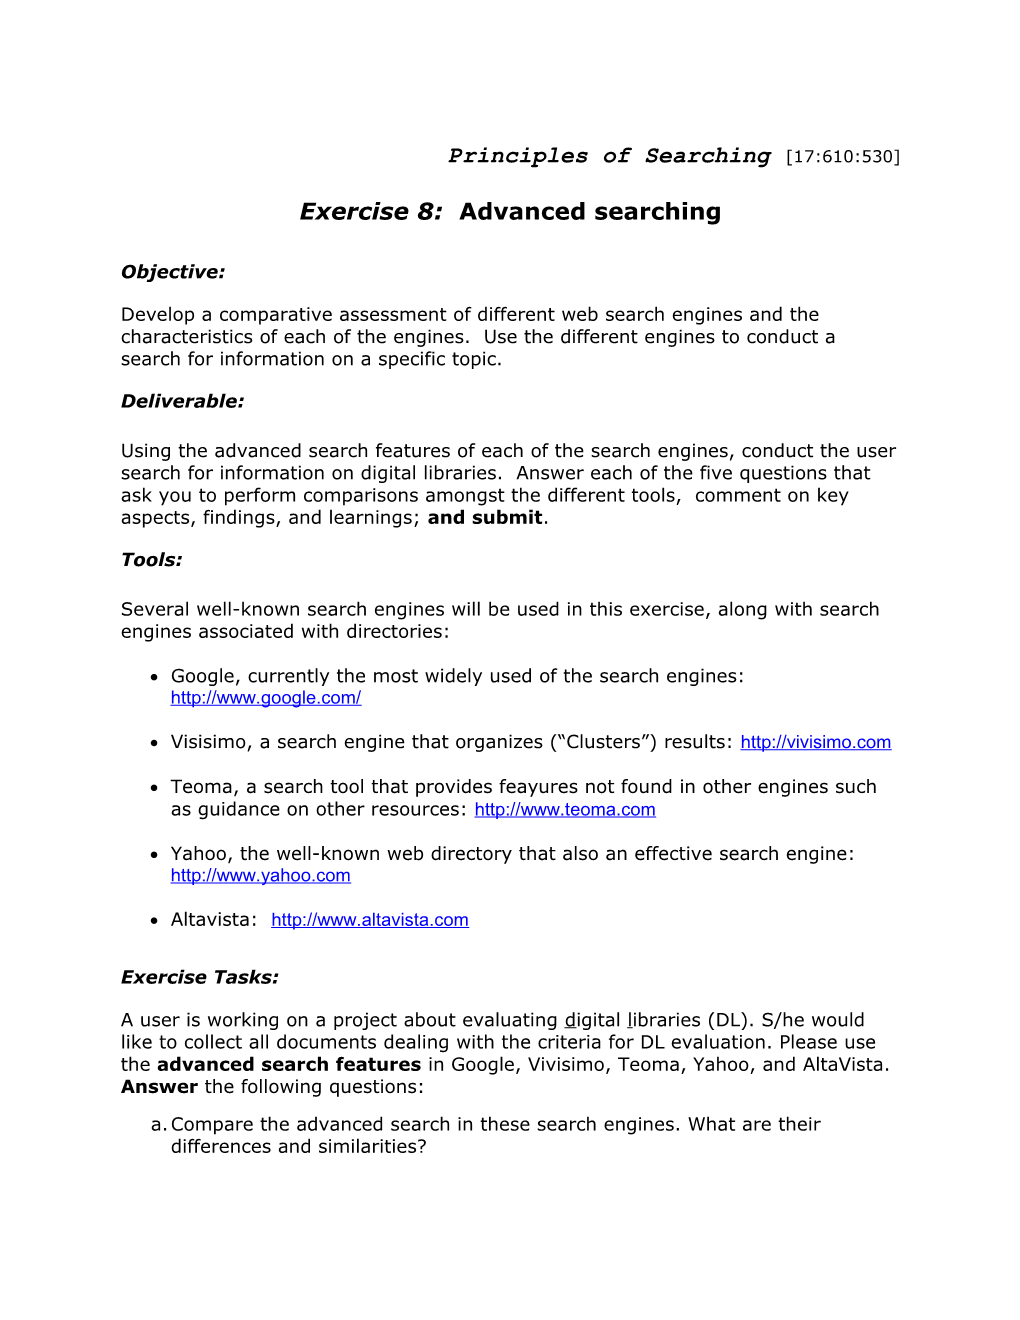 Exercise: Advanced Searching